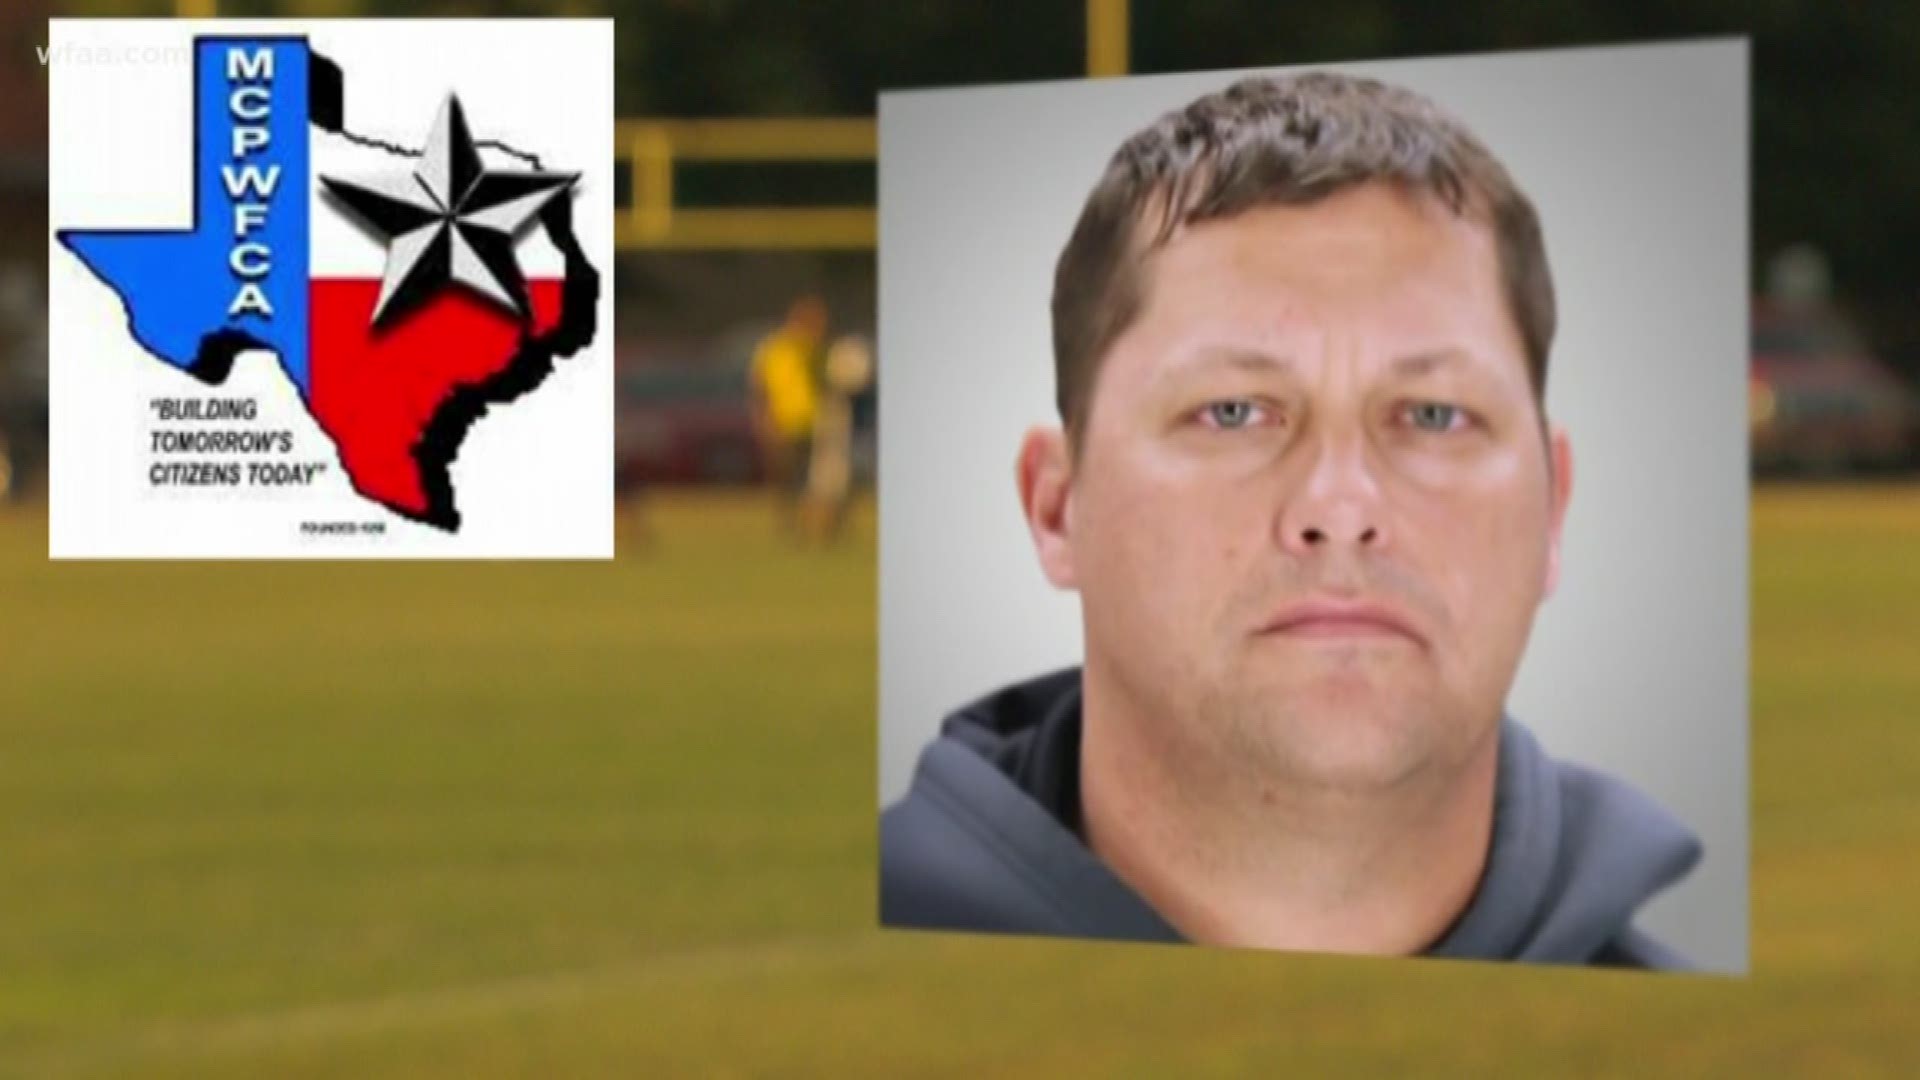 A former DISD coach who is a registered sex offender has been coaching pee wee football in the Mid Cities, according to another coach.